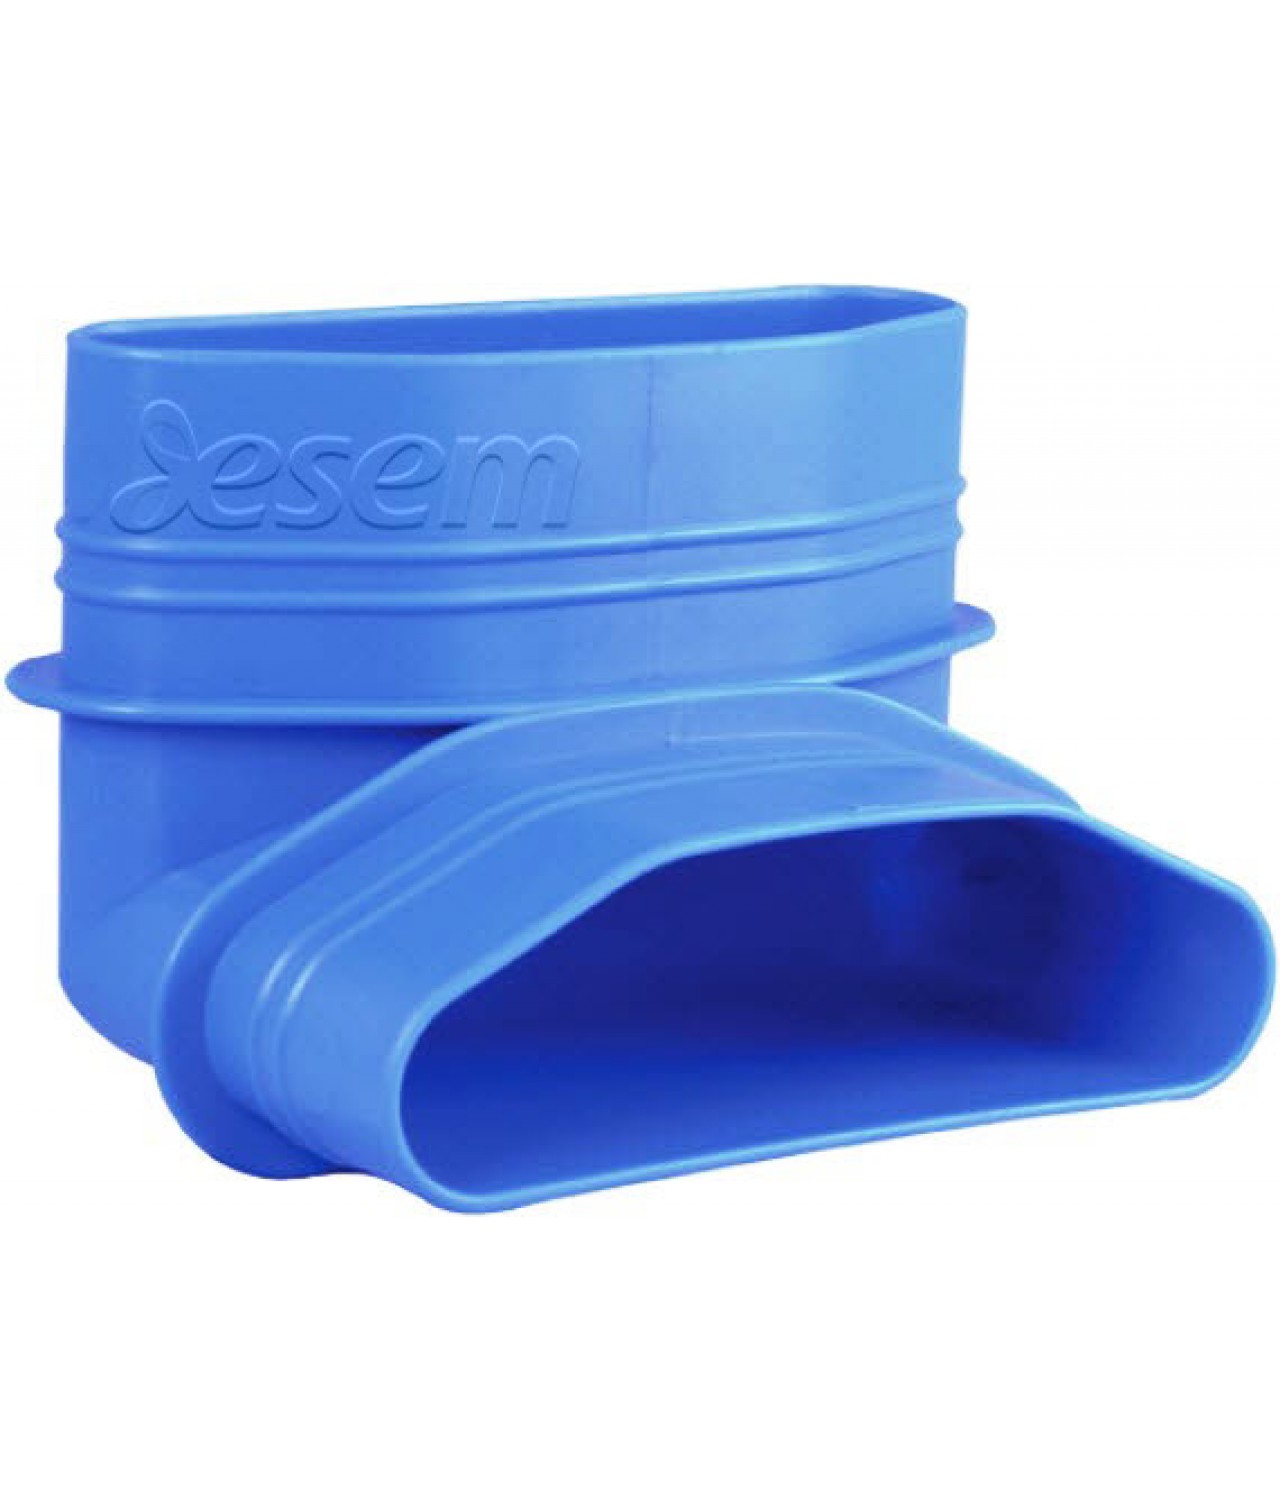 Vertical elbow for HDPE ducts MOV90/132/52 132x52 mm